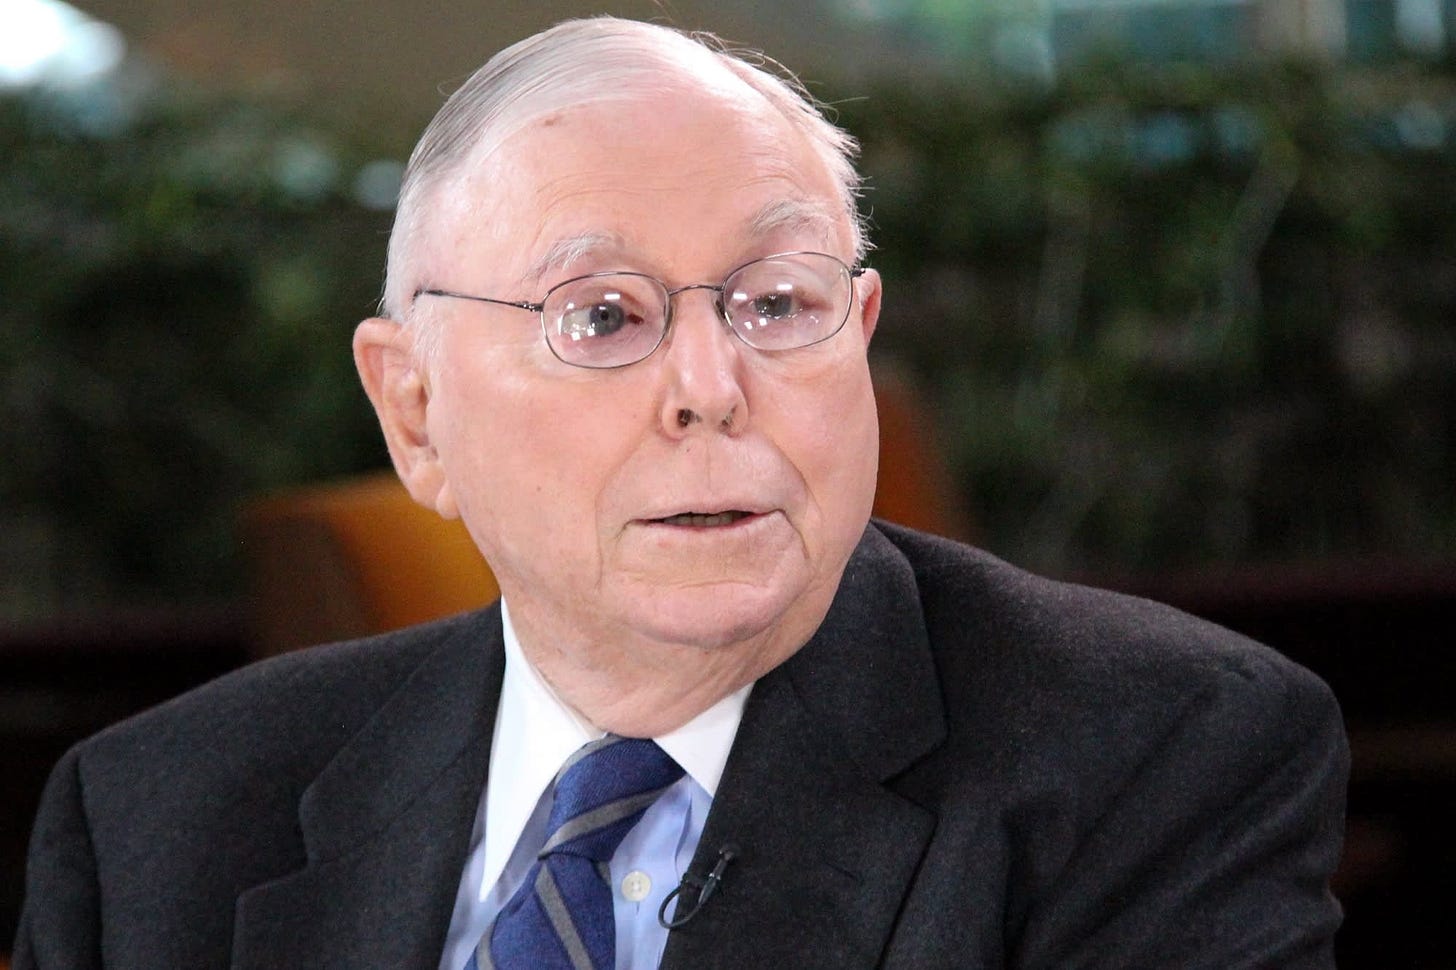 Investor and businessman Charlie Munger on intellectual humility: